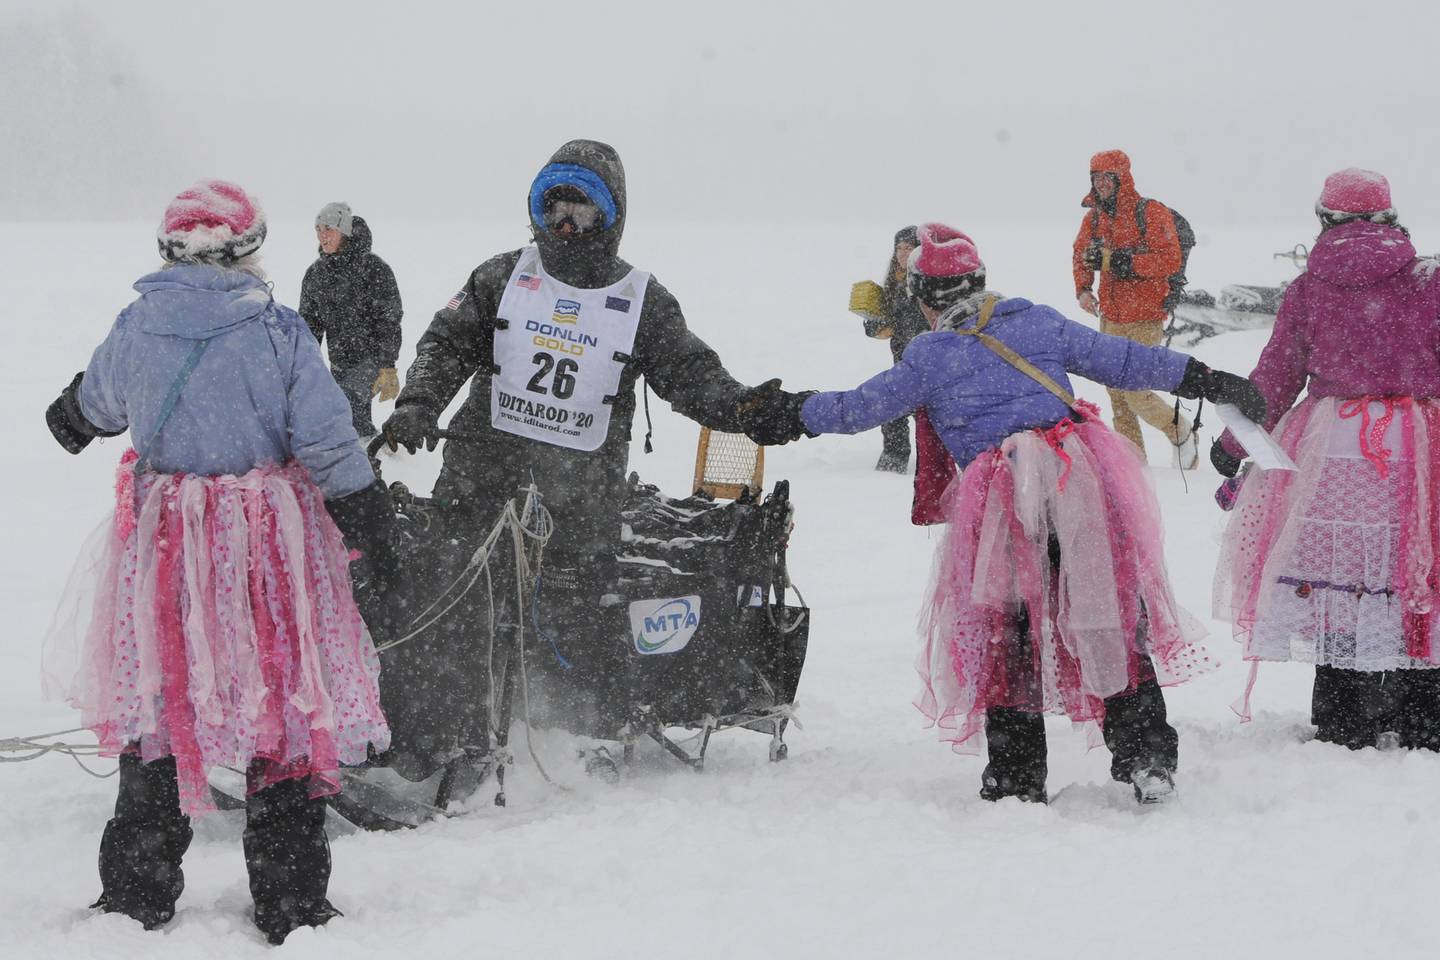 Restart of the Iditarod Trail Sled Dog Race in Willow